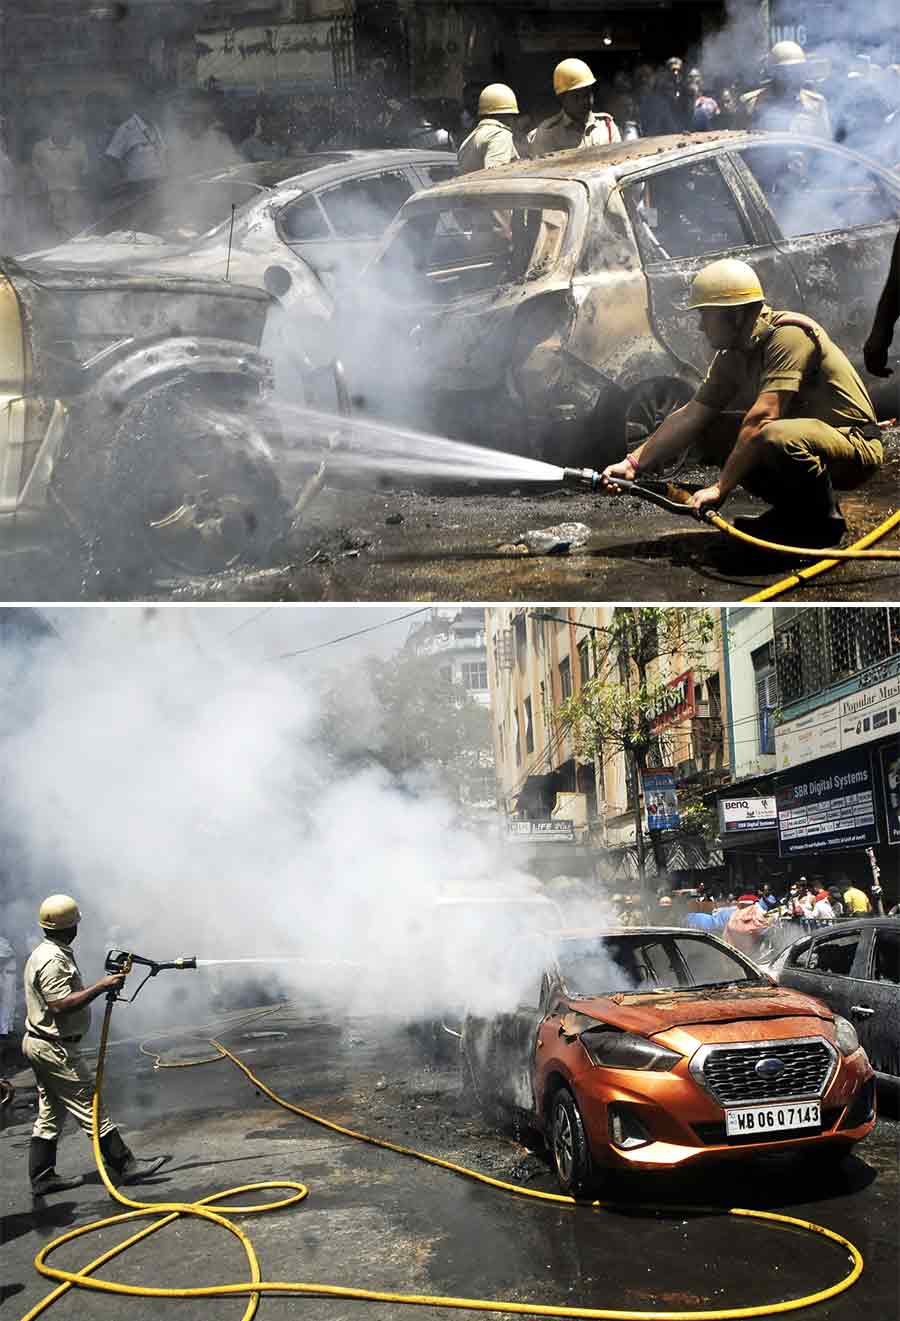 Three cars caught fire on Thursday afternoon at Chandni Chowk. Four fire-tenders were pressed into service to douse the flame. The exact reason which triggered the blaze has not been ascertained yet. No casualties were reported